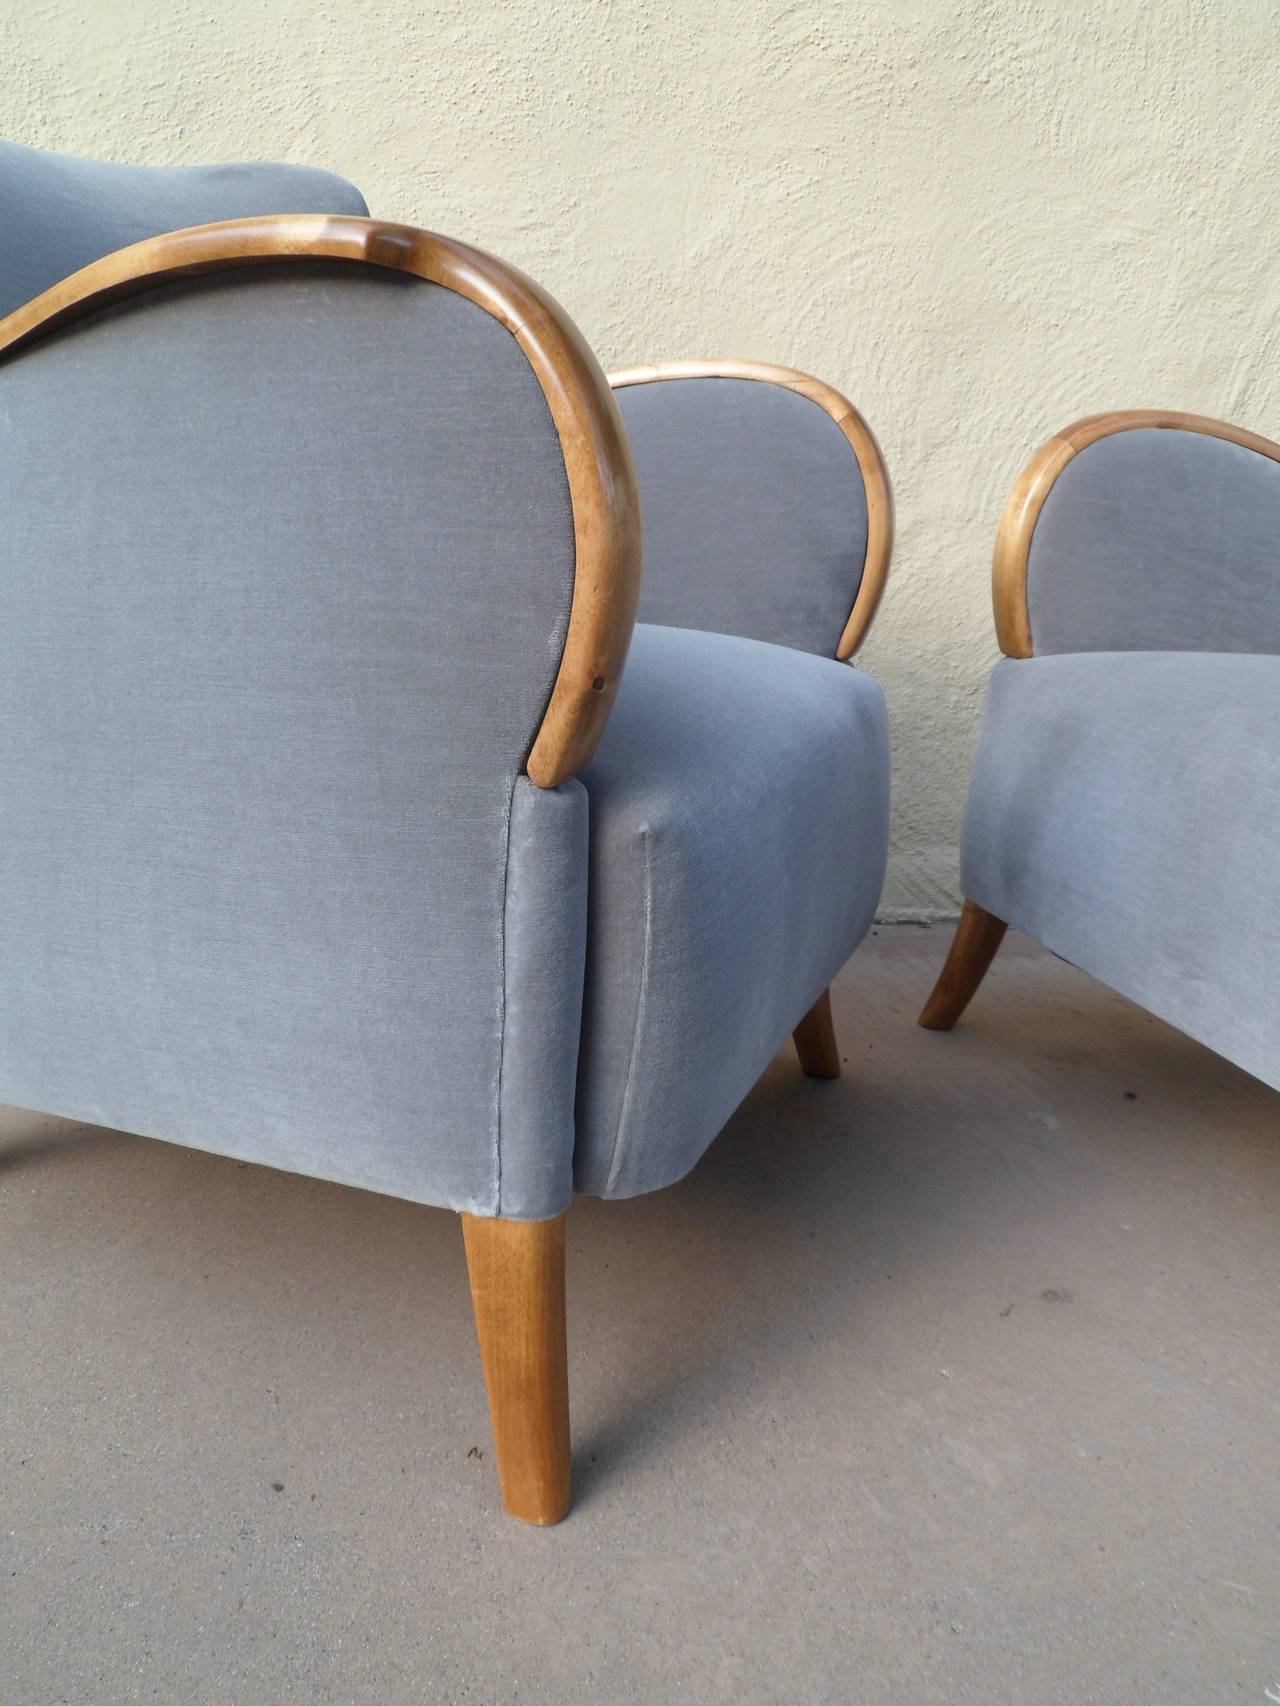 Pair of Swedish Art Deco Armchairs in Golden Birch Wood and Gray Velvet. Wood had been completely restored by our woodworkers. Freshly reupholstered in gray velvet. A sculptural, comfortable pair of chairs in a smaller scale. Made in Sweden ca.